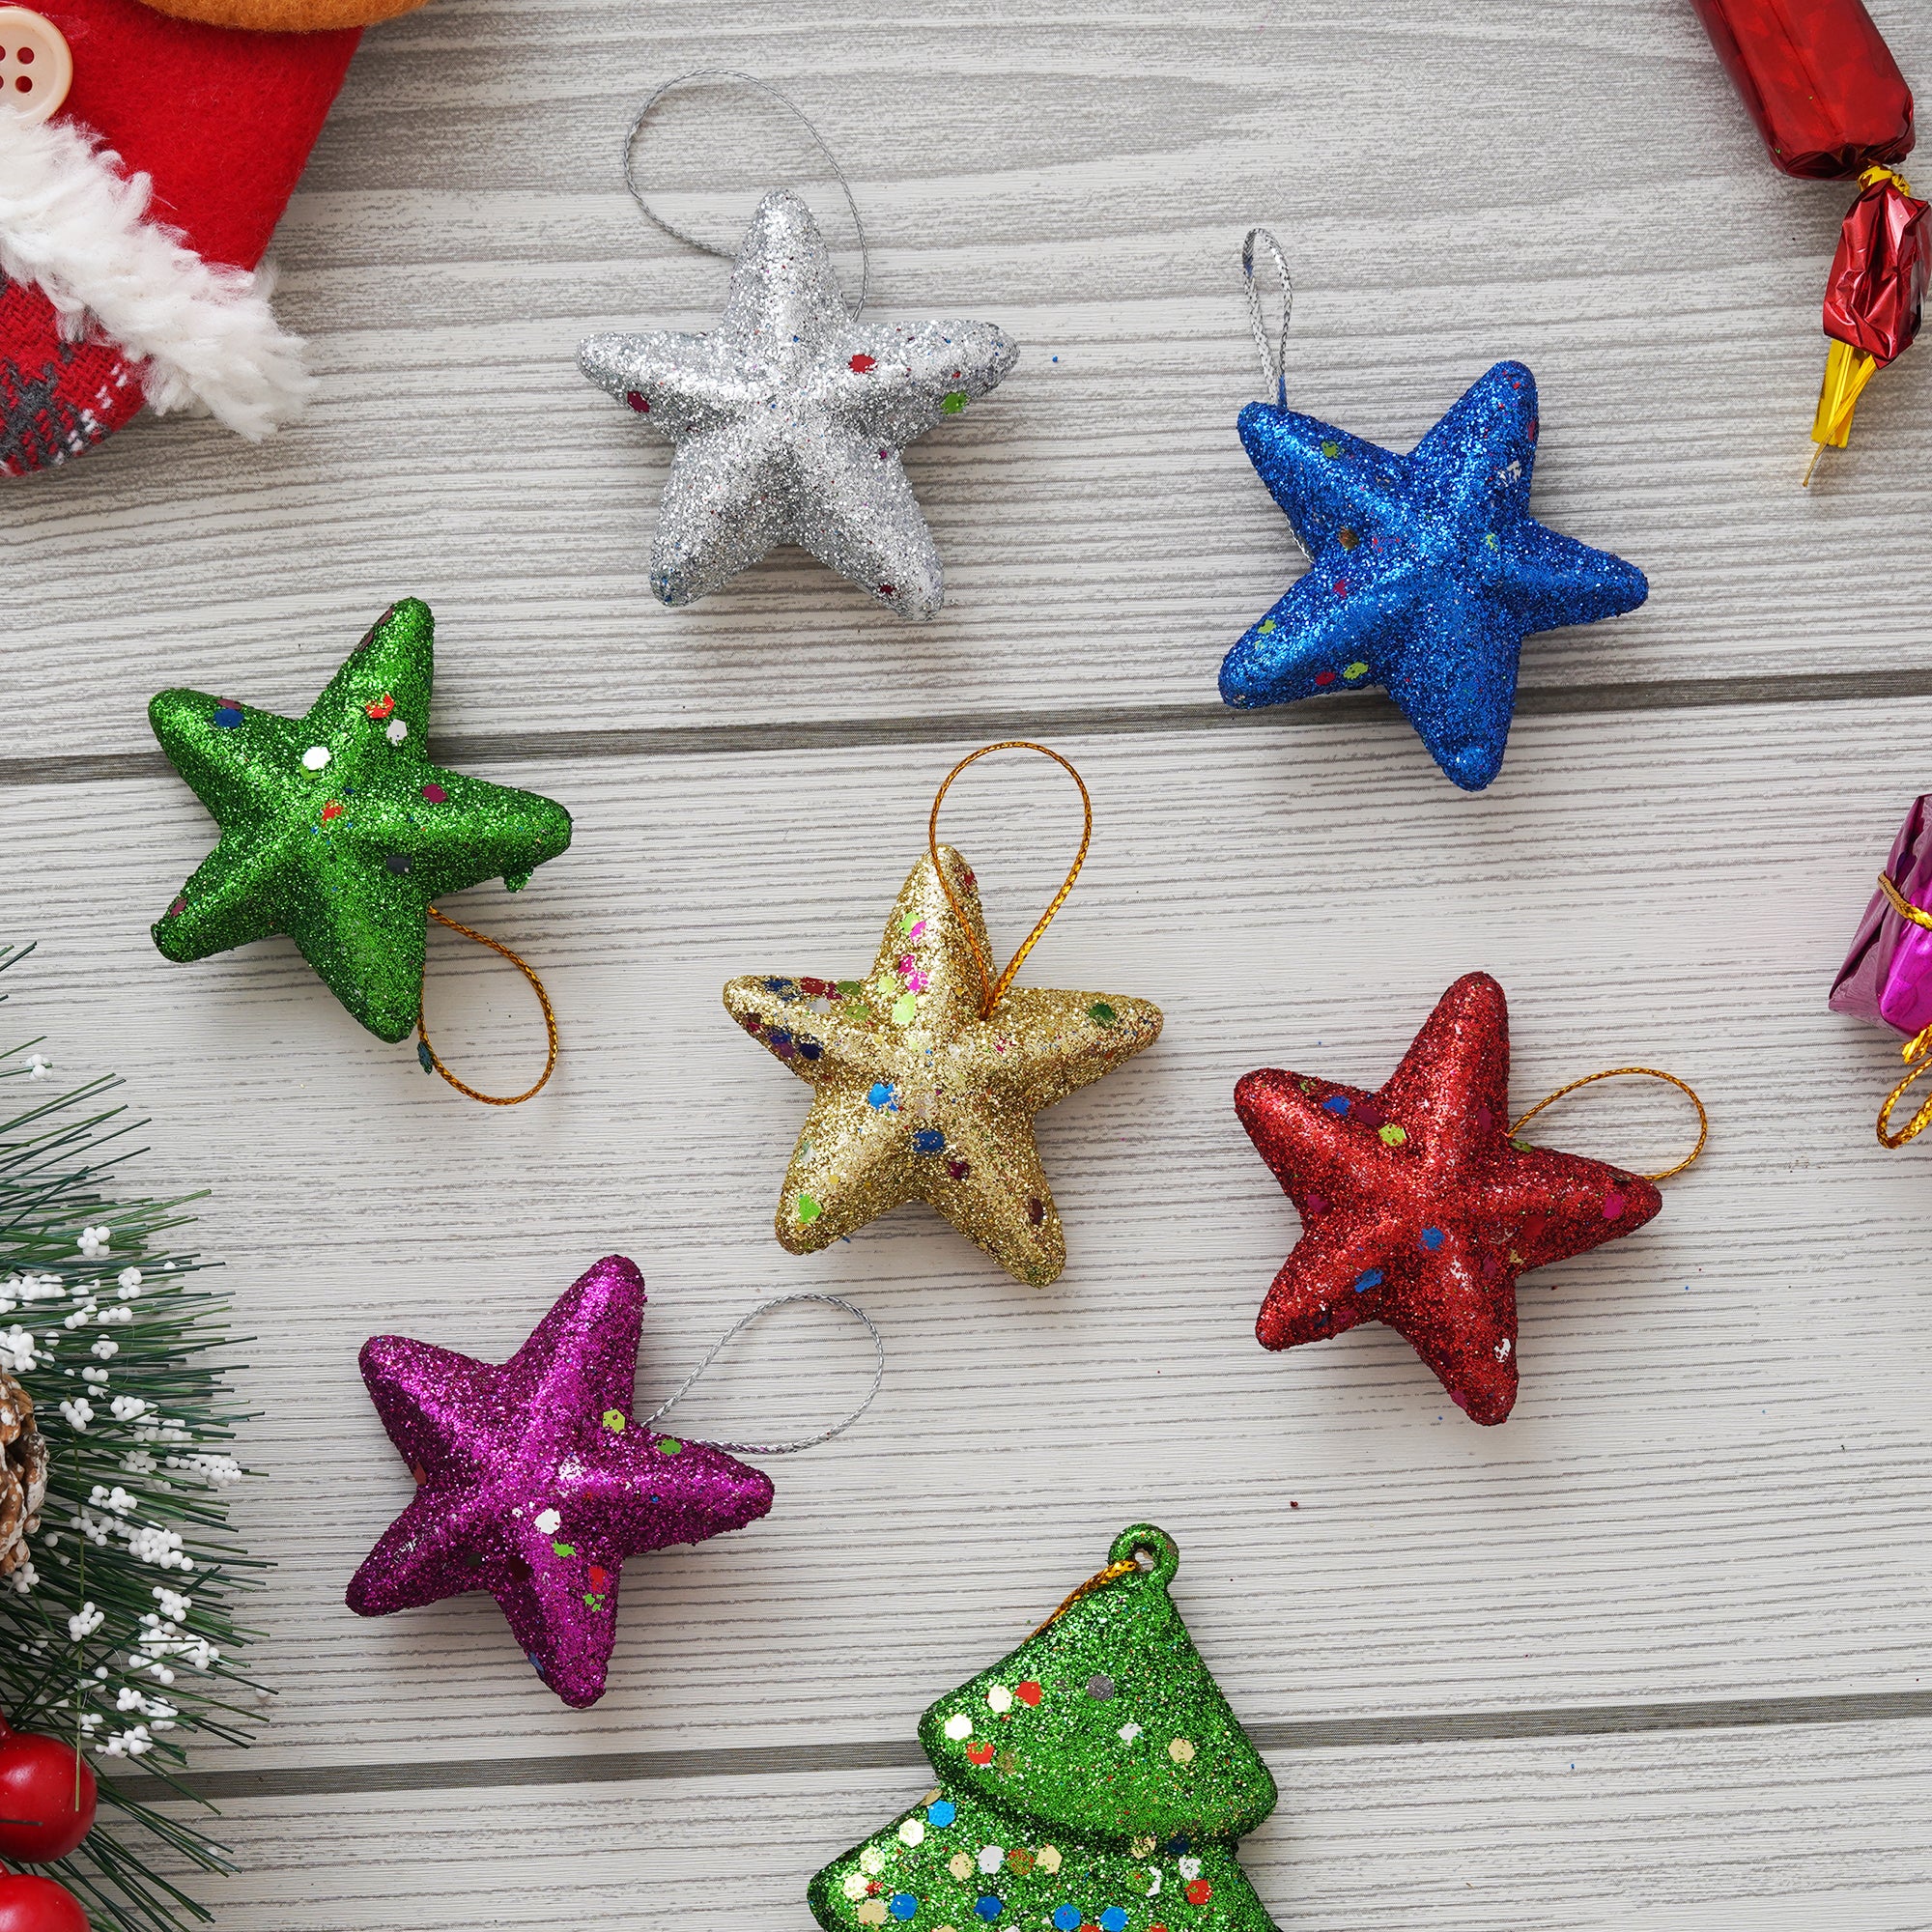 eCraftIndia Multicolor Glittering Xmas Stars for Decorating Christmas Tree and Hanging on Walls, Doors Set of 5 Pieces